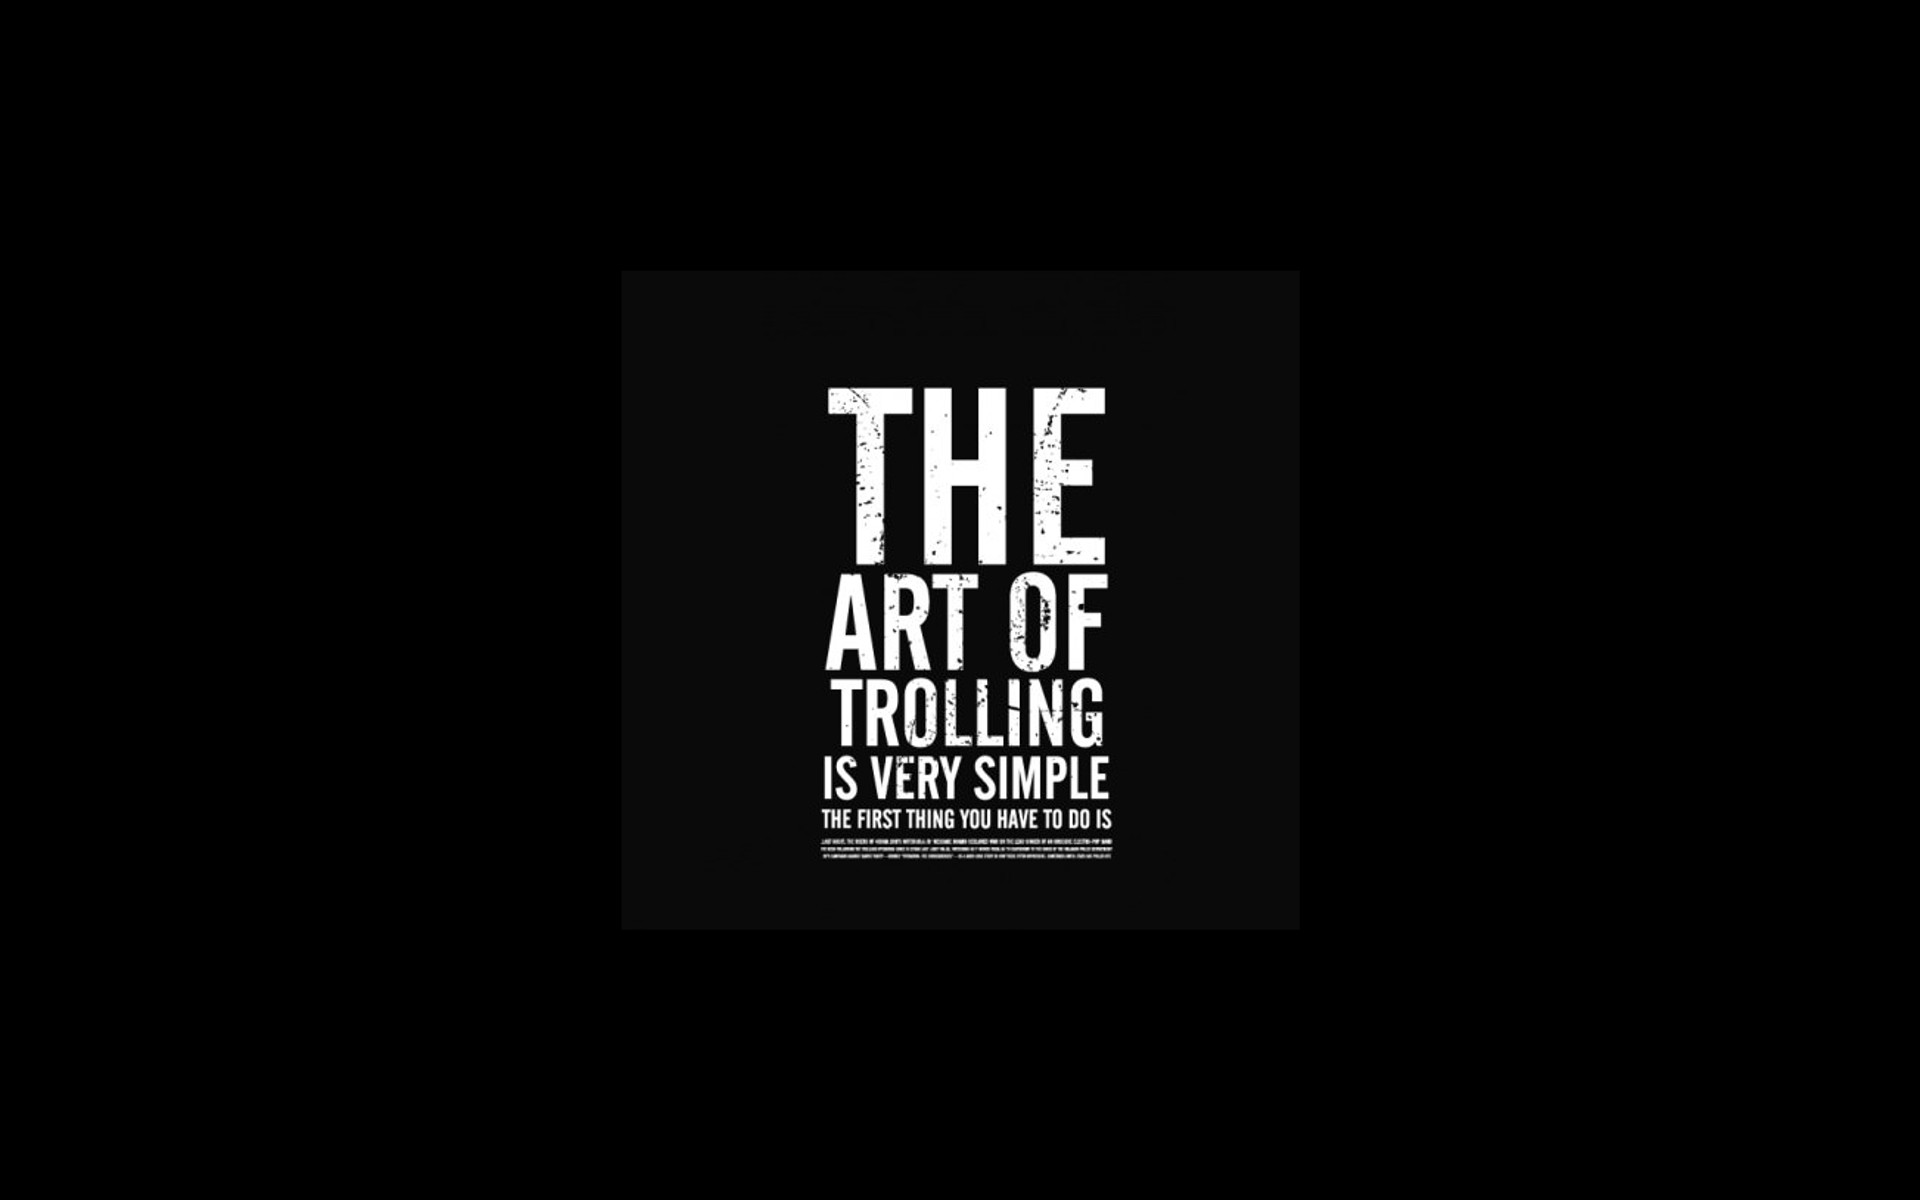 text, Humor, Funny, Typography, Trolling, Artwork, Black, Background Wallpaper